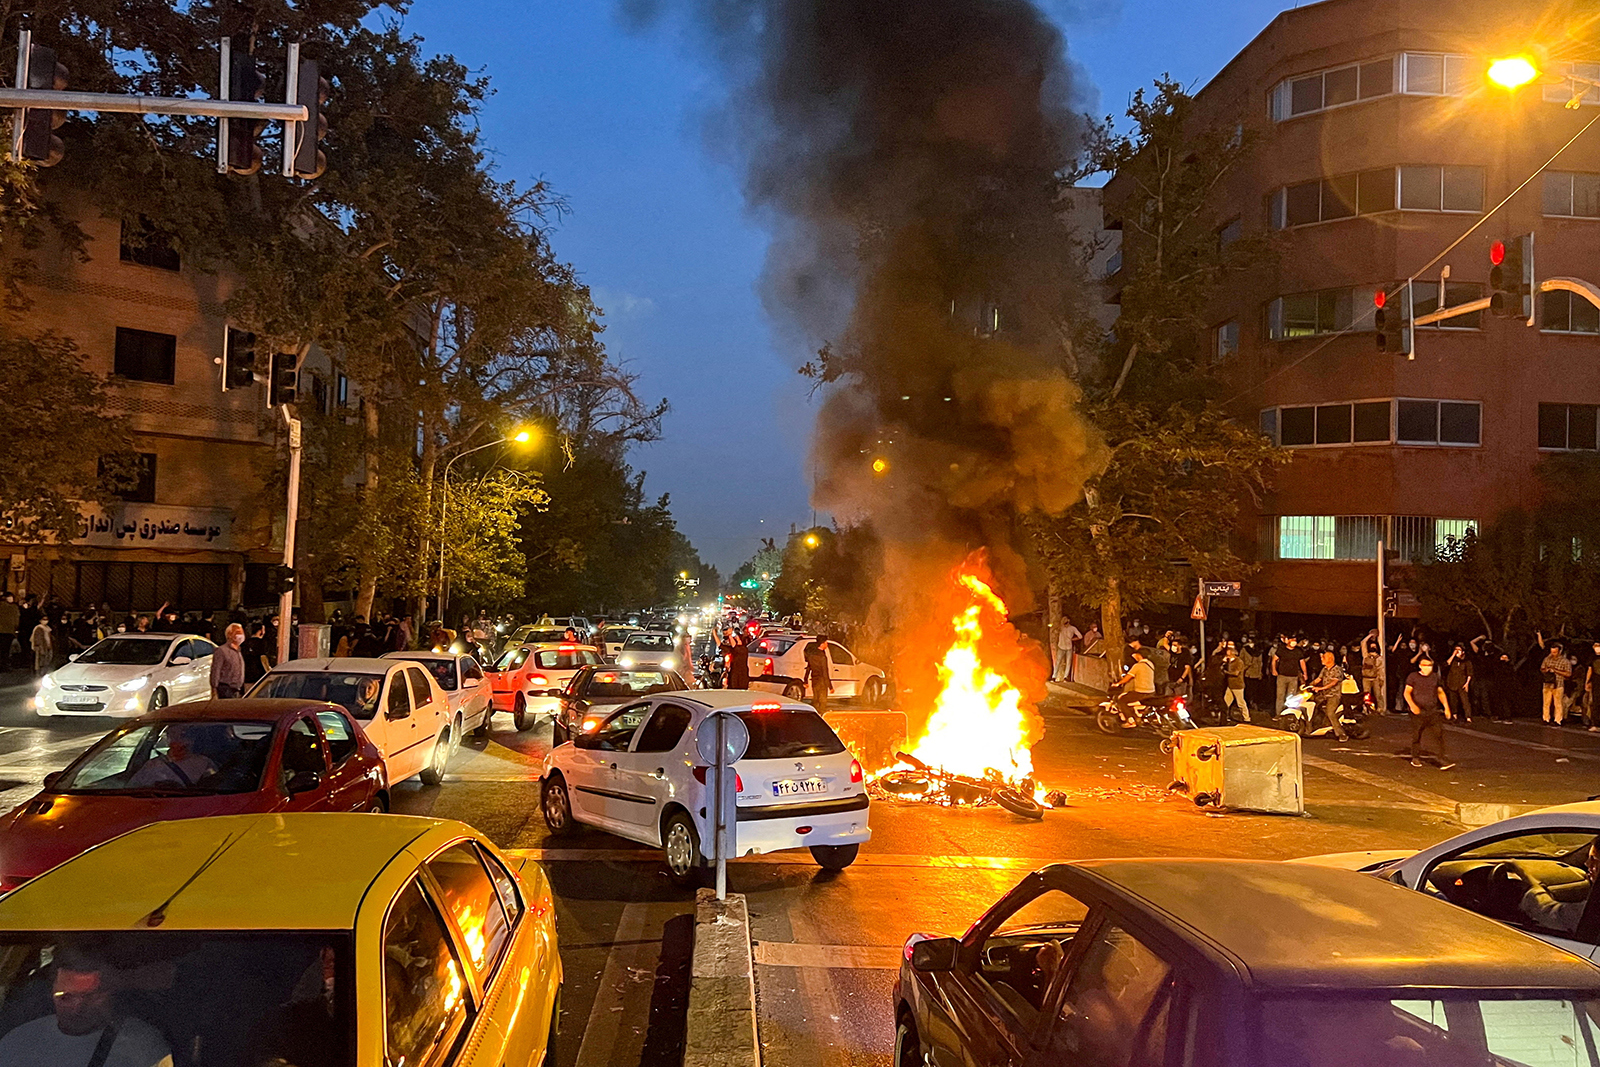 A police motorcycle burns during a protest over the death of Mahsa Amini, a woman who died after being arrested by the Islamic republic's "morality police", in Tehran, Iran September 19, 2022.  